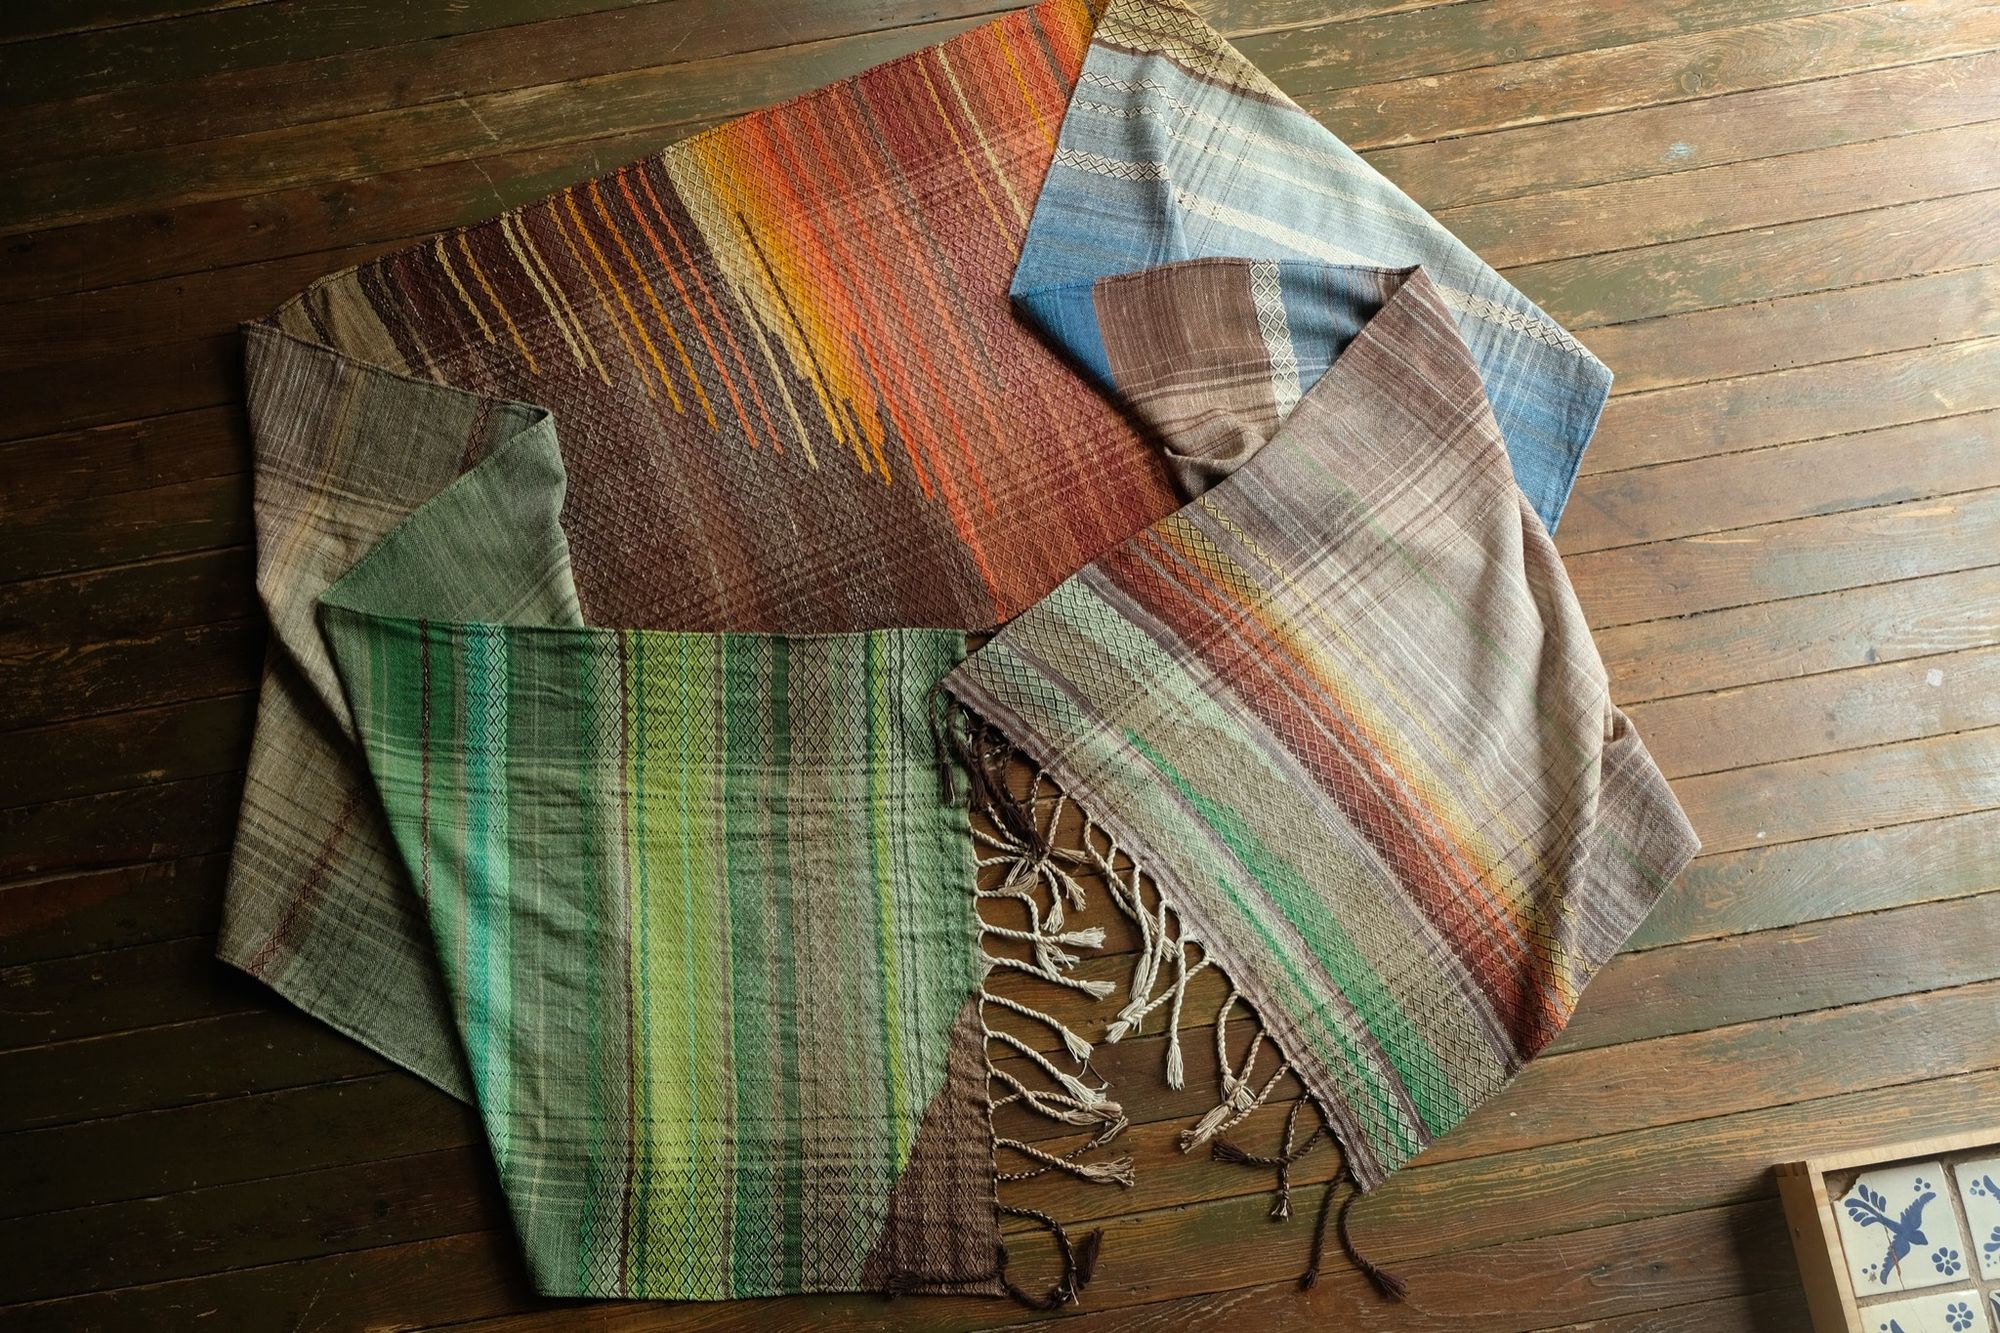 Large brown, red, orange, yellow, blue and green piece of handwoven fabric laying on a wooden floor. 